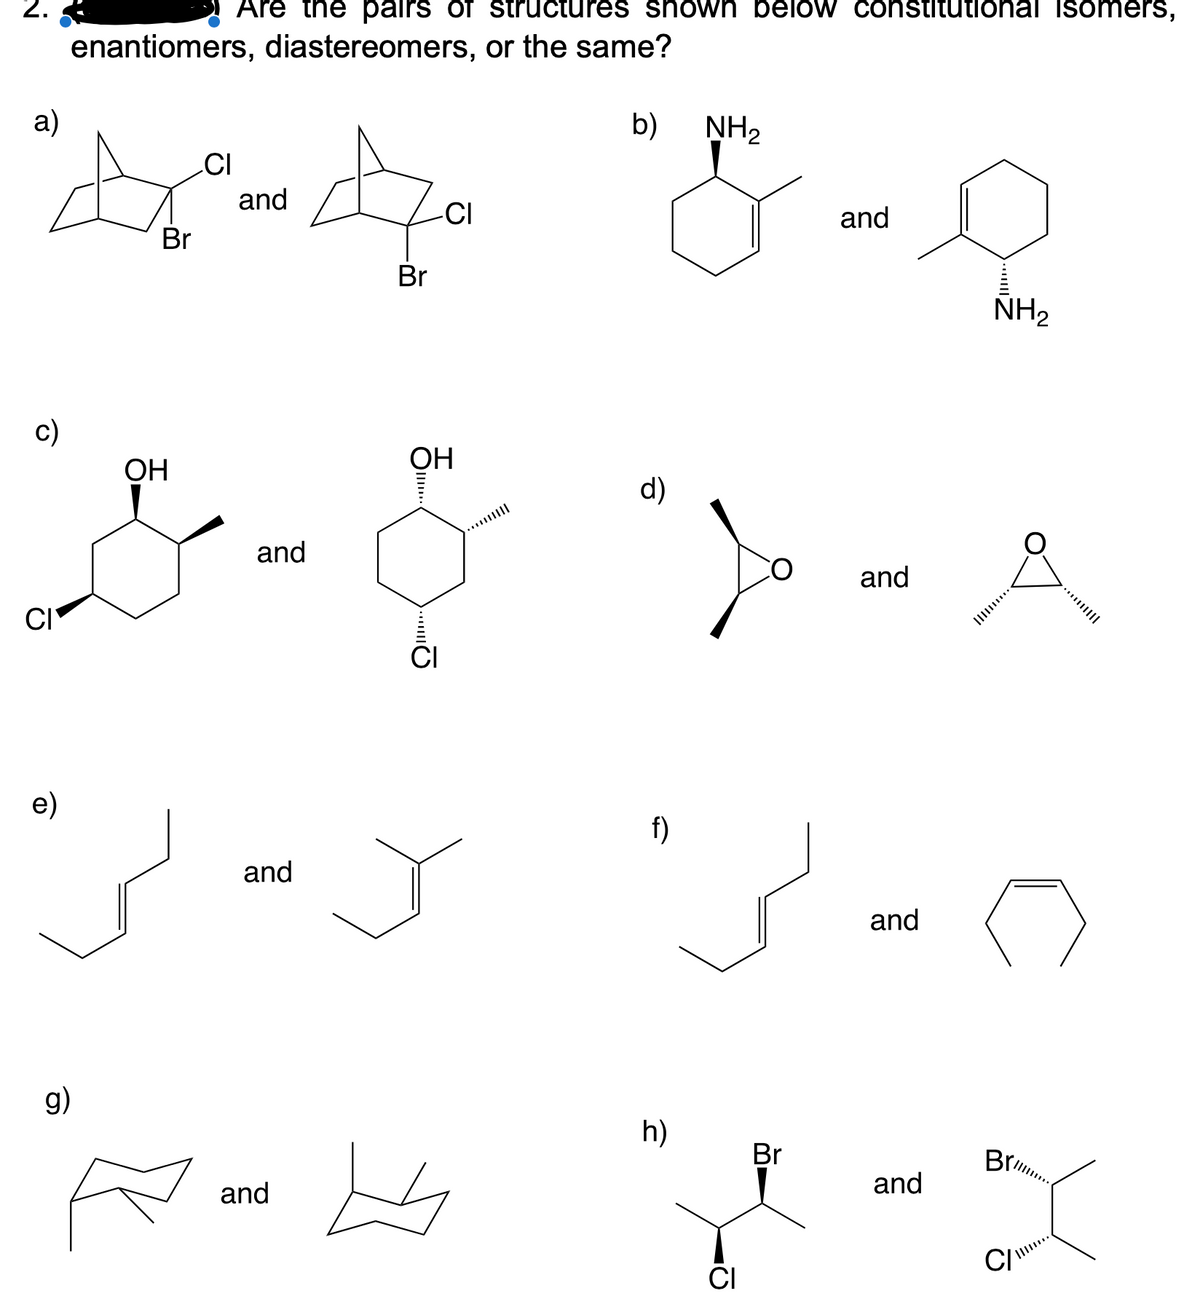 2.
Are the pairs of structures shown below constitutional isomers,
enantiomers, diastereomers, or the same?
a)
b)
NH2
CI
and
-CI
and
Br
Br
NH2
с)
ОН
OH
d)
and
and
CI
e)
f)
and
and
g)
h)
Br
Br
and
and
CI
C/
